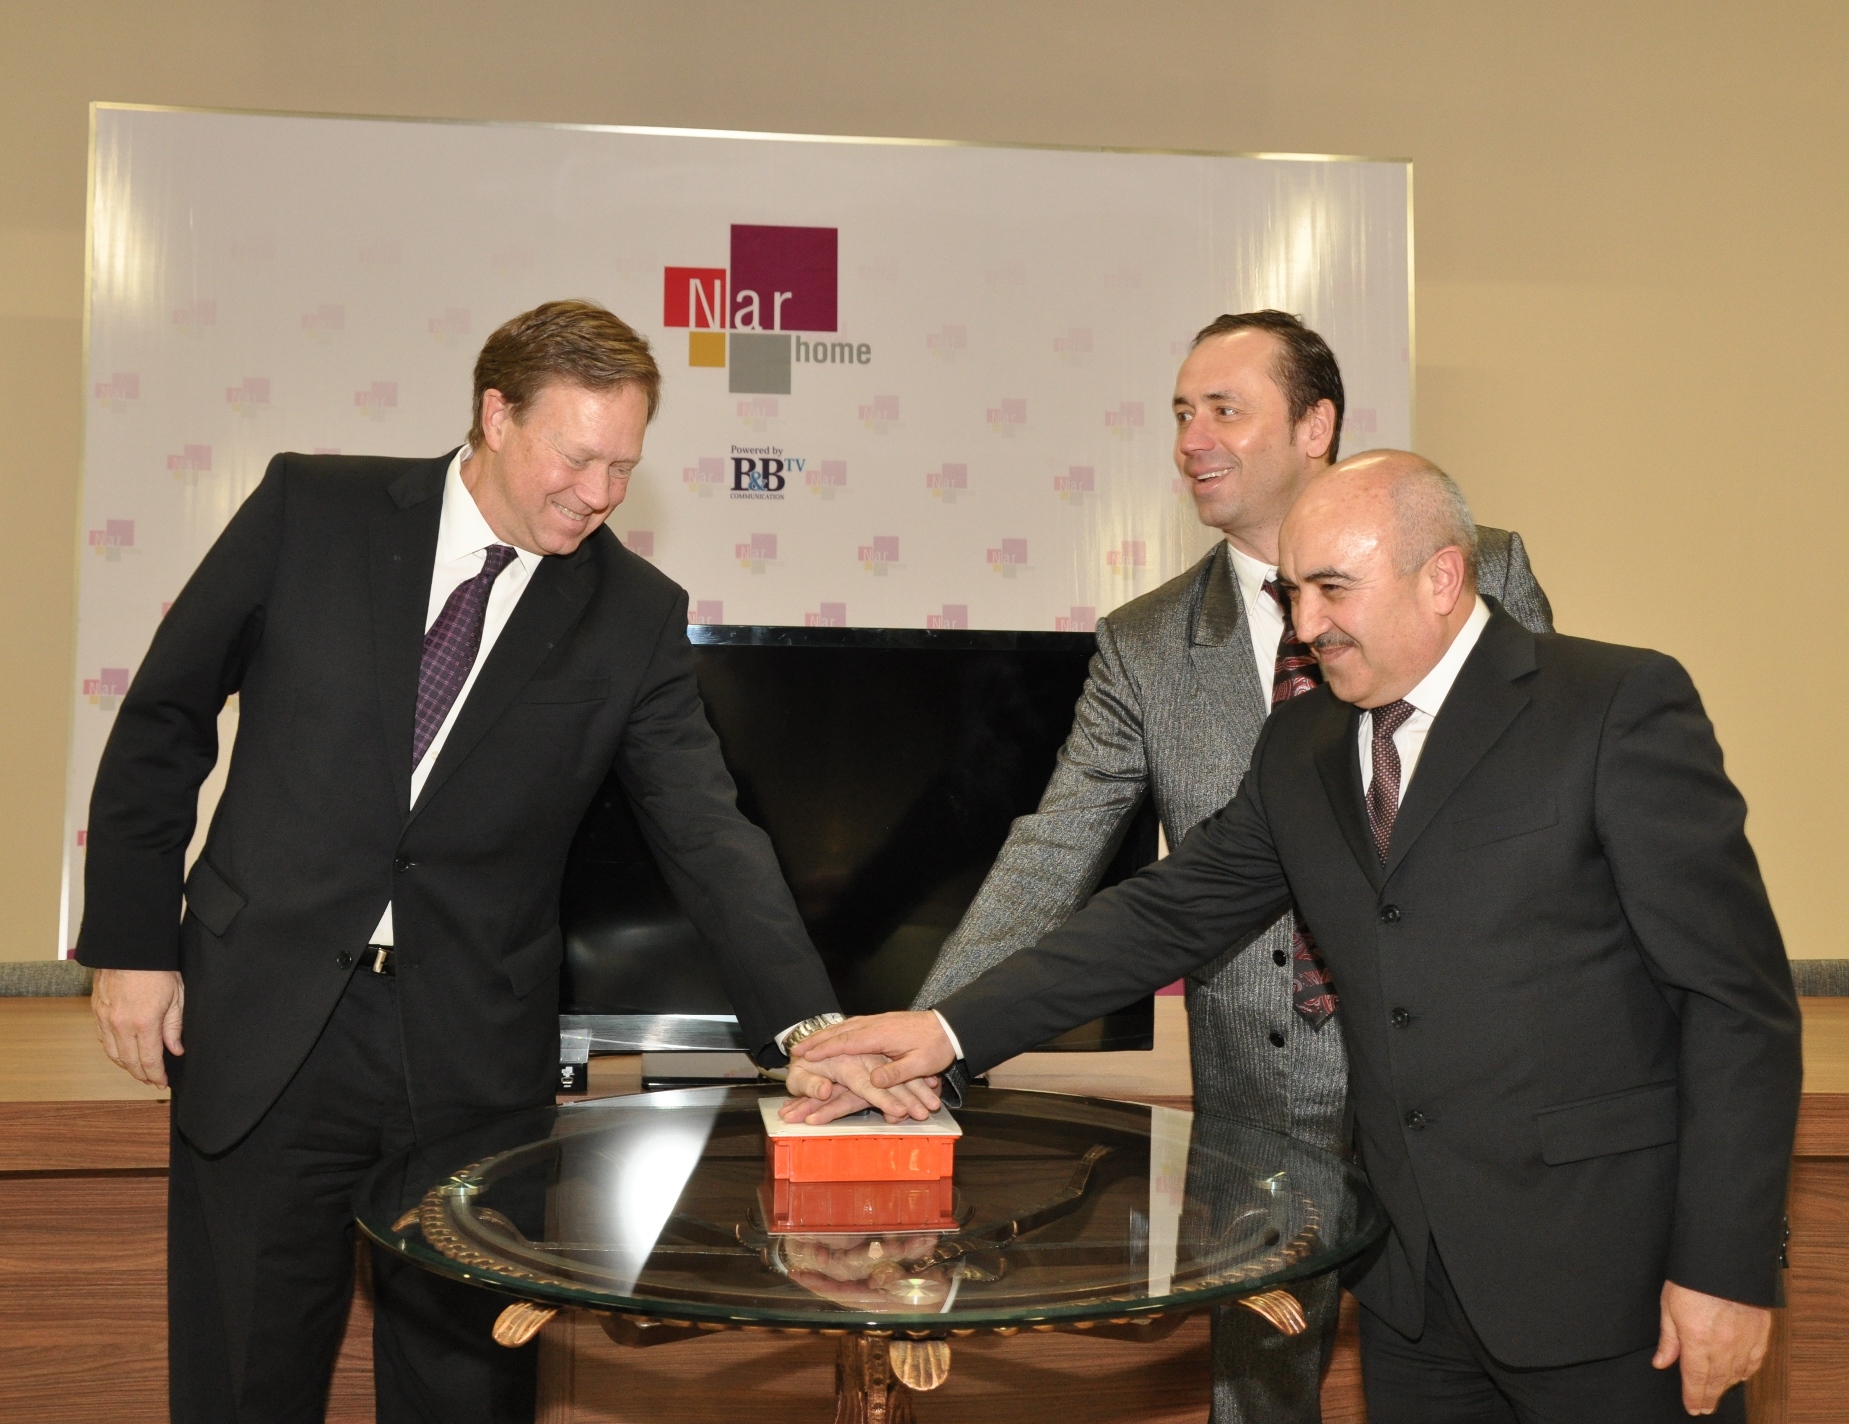 Nar Mobile launches a new product in Nakhchivan